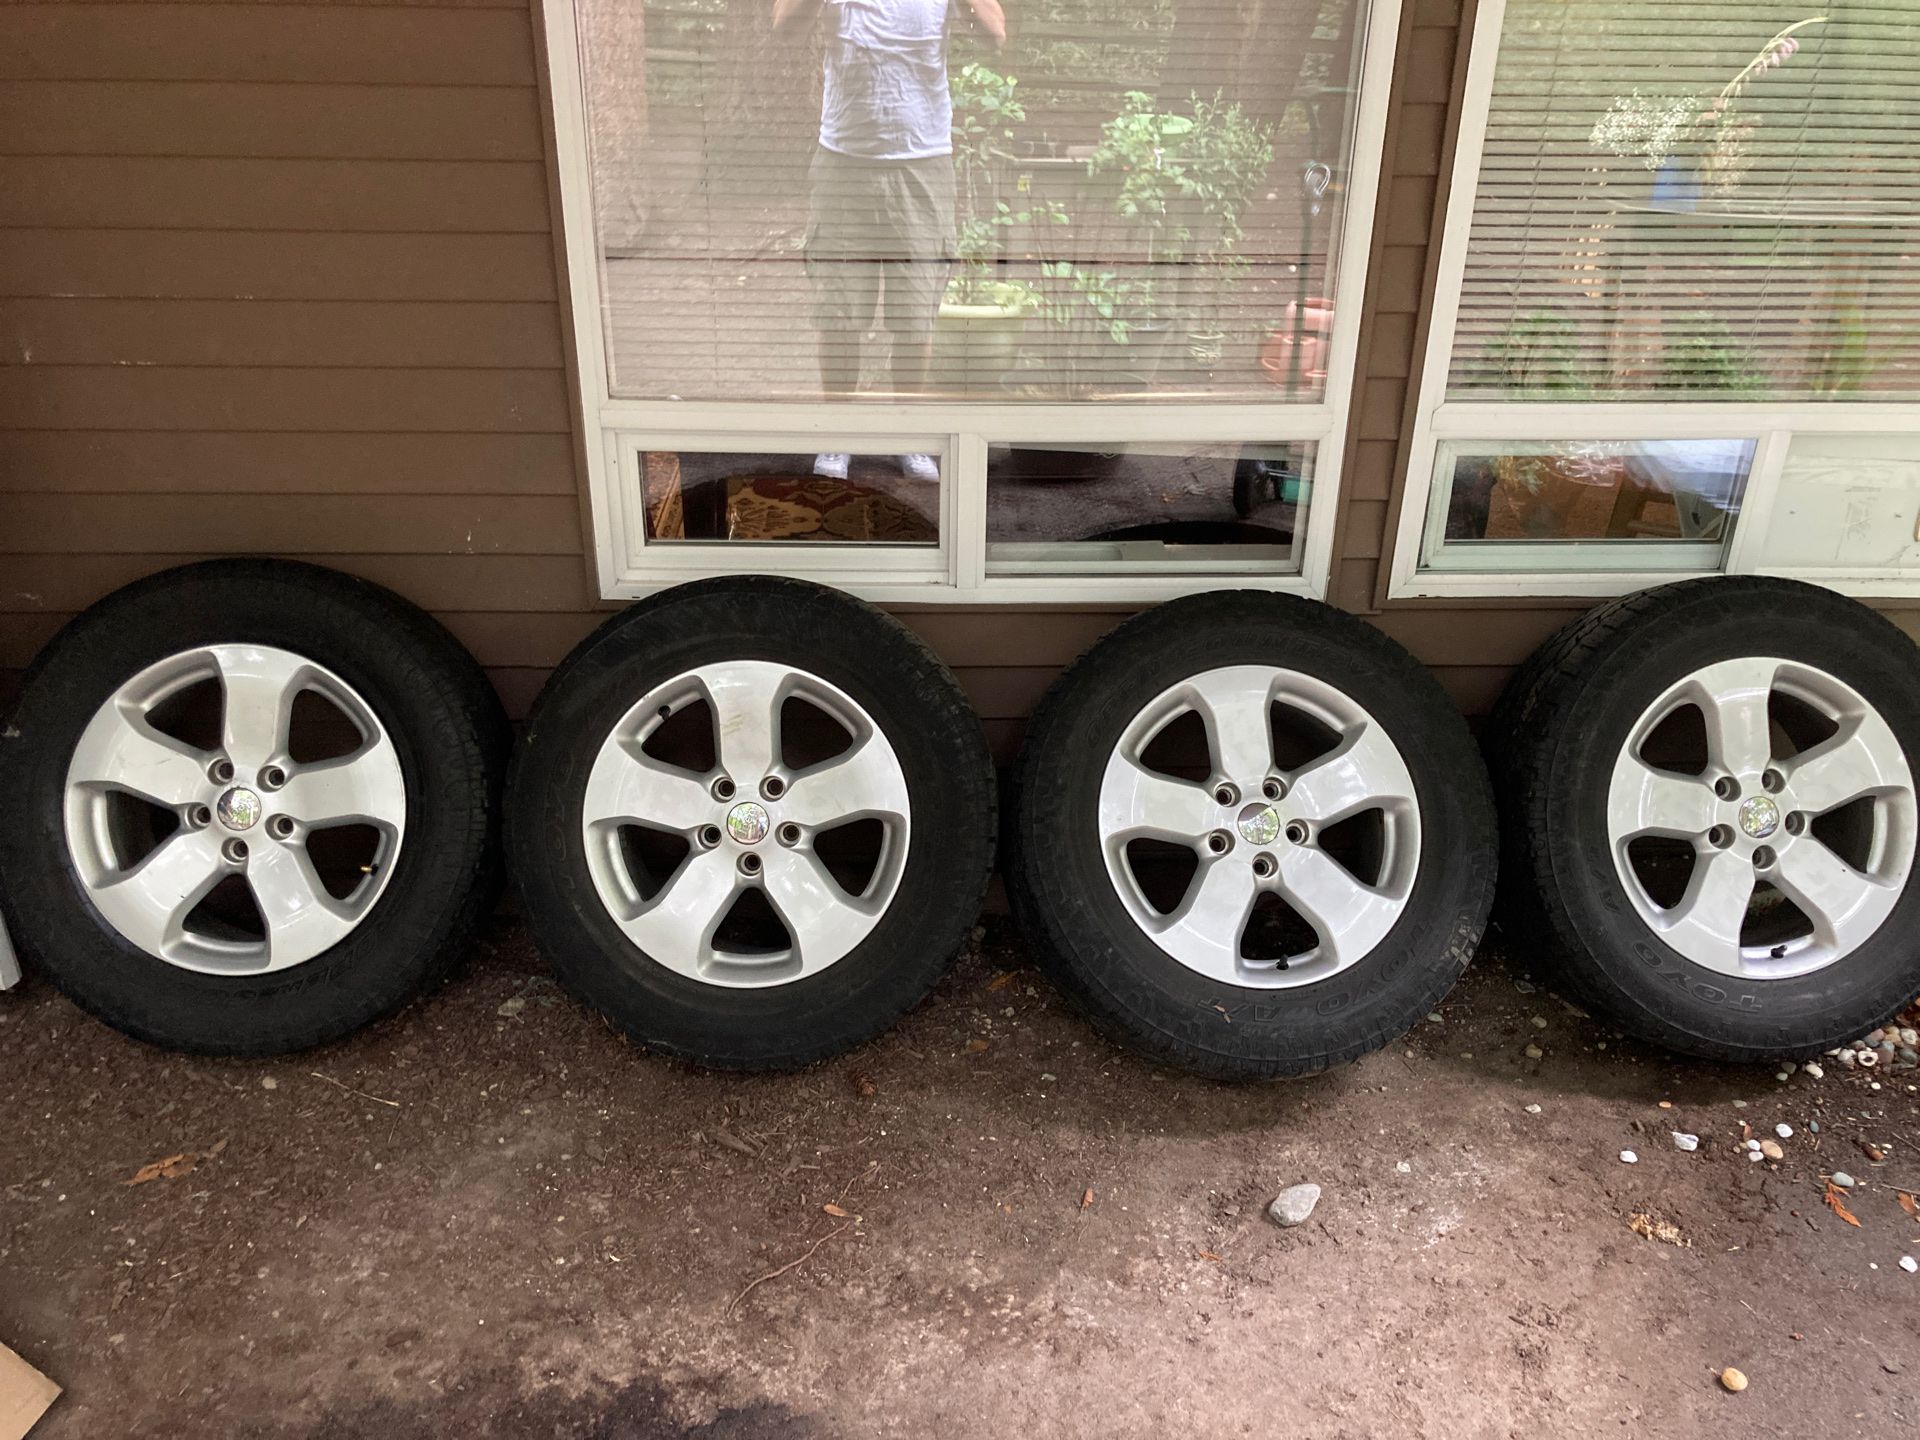 Jeep GC wheels and Tires (Toyo open country)